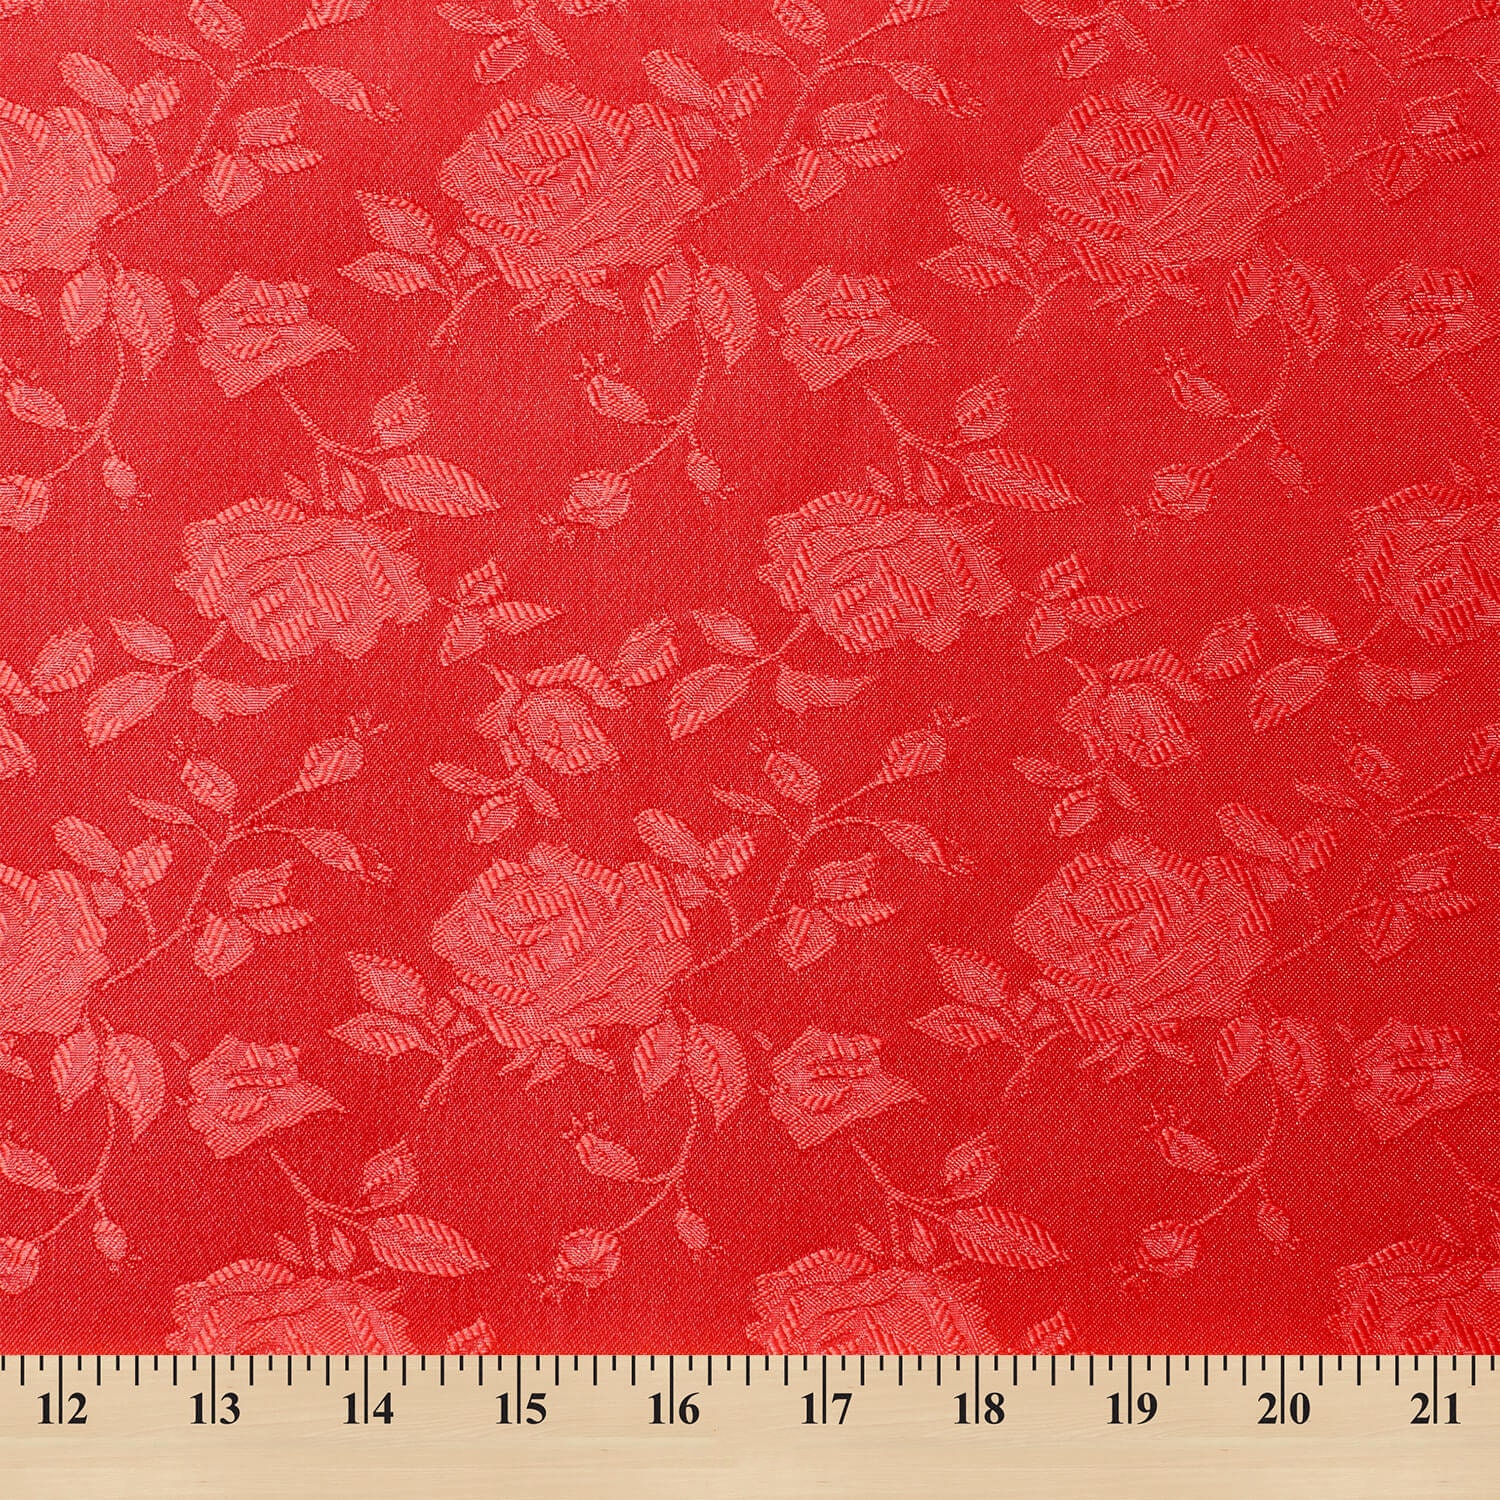 Rose Satin Jacquard Fabric Red Polyester Double-sided Floral 59/60 by the  Yard -  Canada